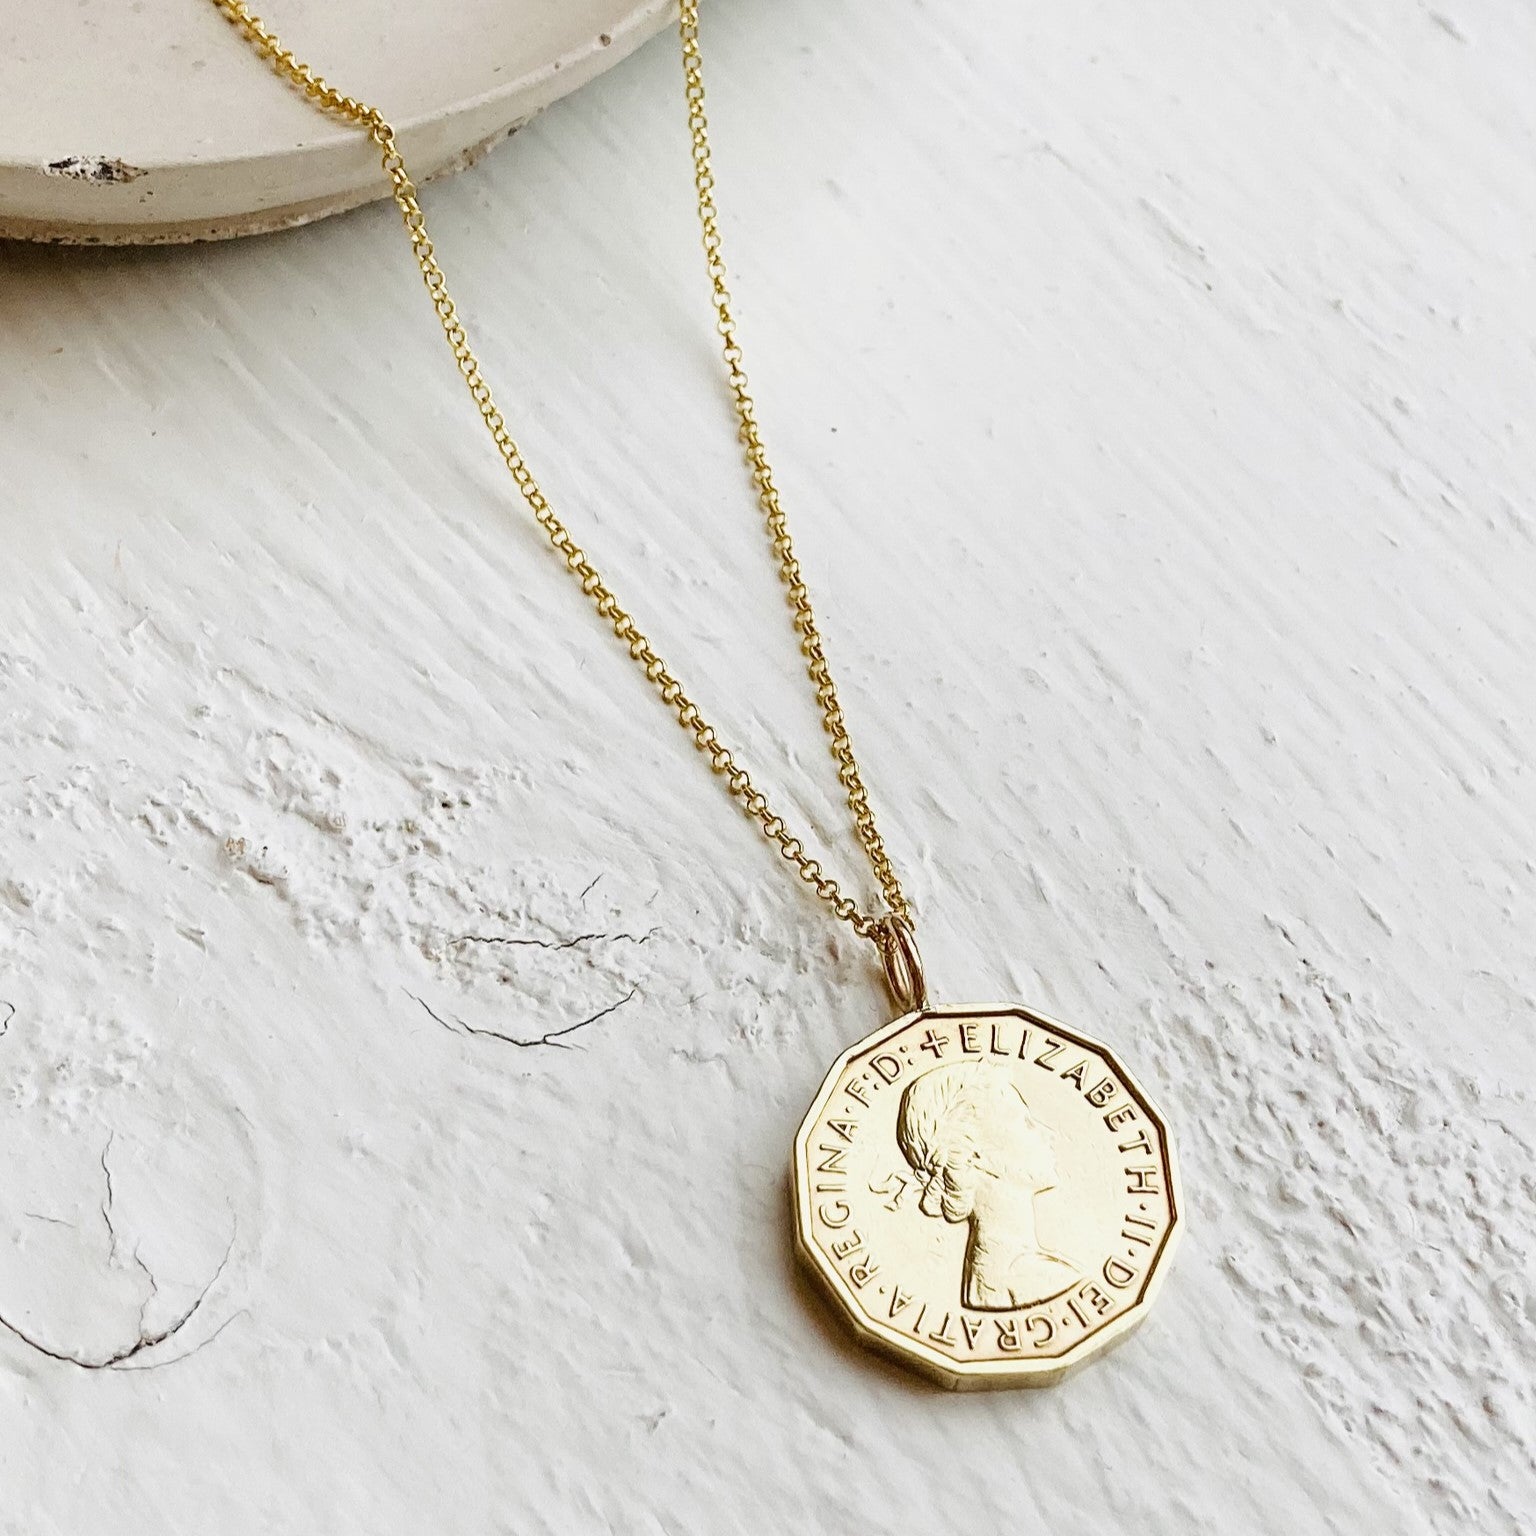 Gold coin necklaces, pendant gifts for men and women, celebrate a 60th